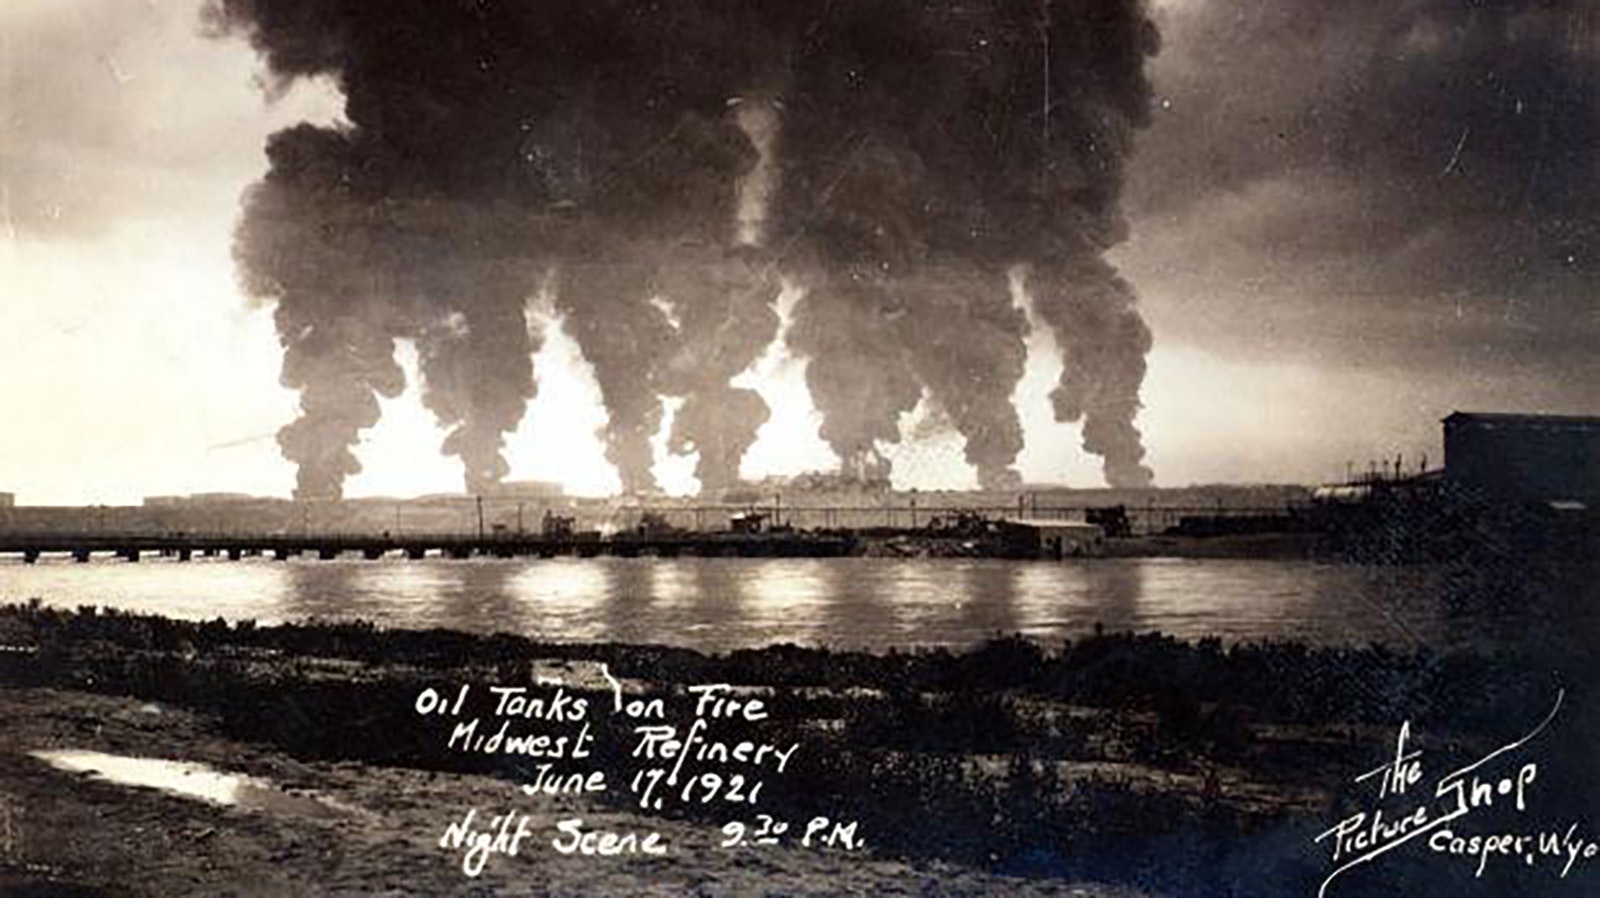 Smoke the burning oil tanks on the north side of the North Platte River can be seen blackening the sky on June 17, 1921.